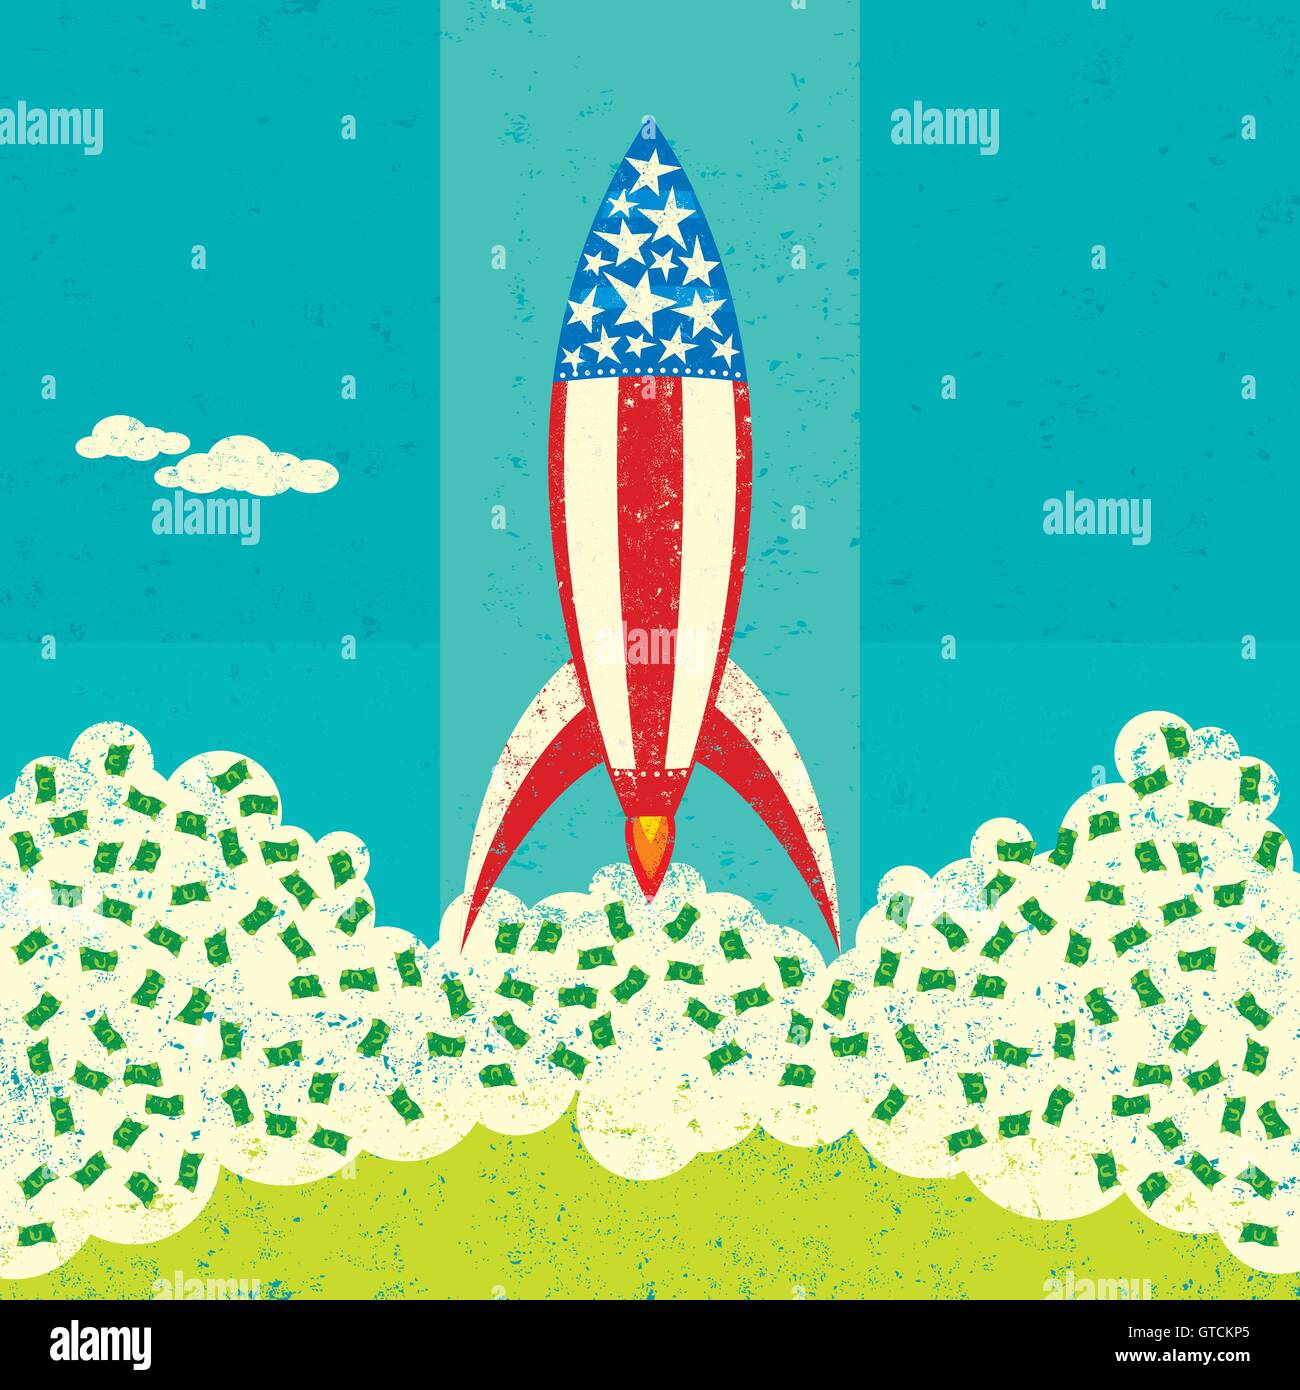 American economy taking off A rocket, representing the American economy, launching from the ground with cash blowing everywhere. Stock Vector